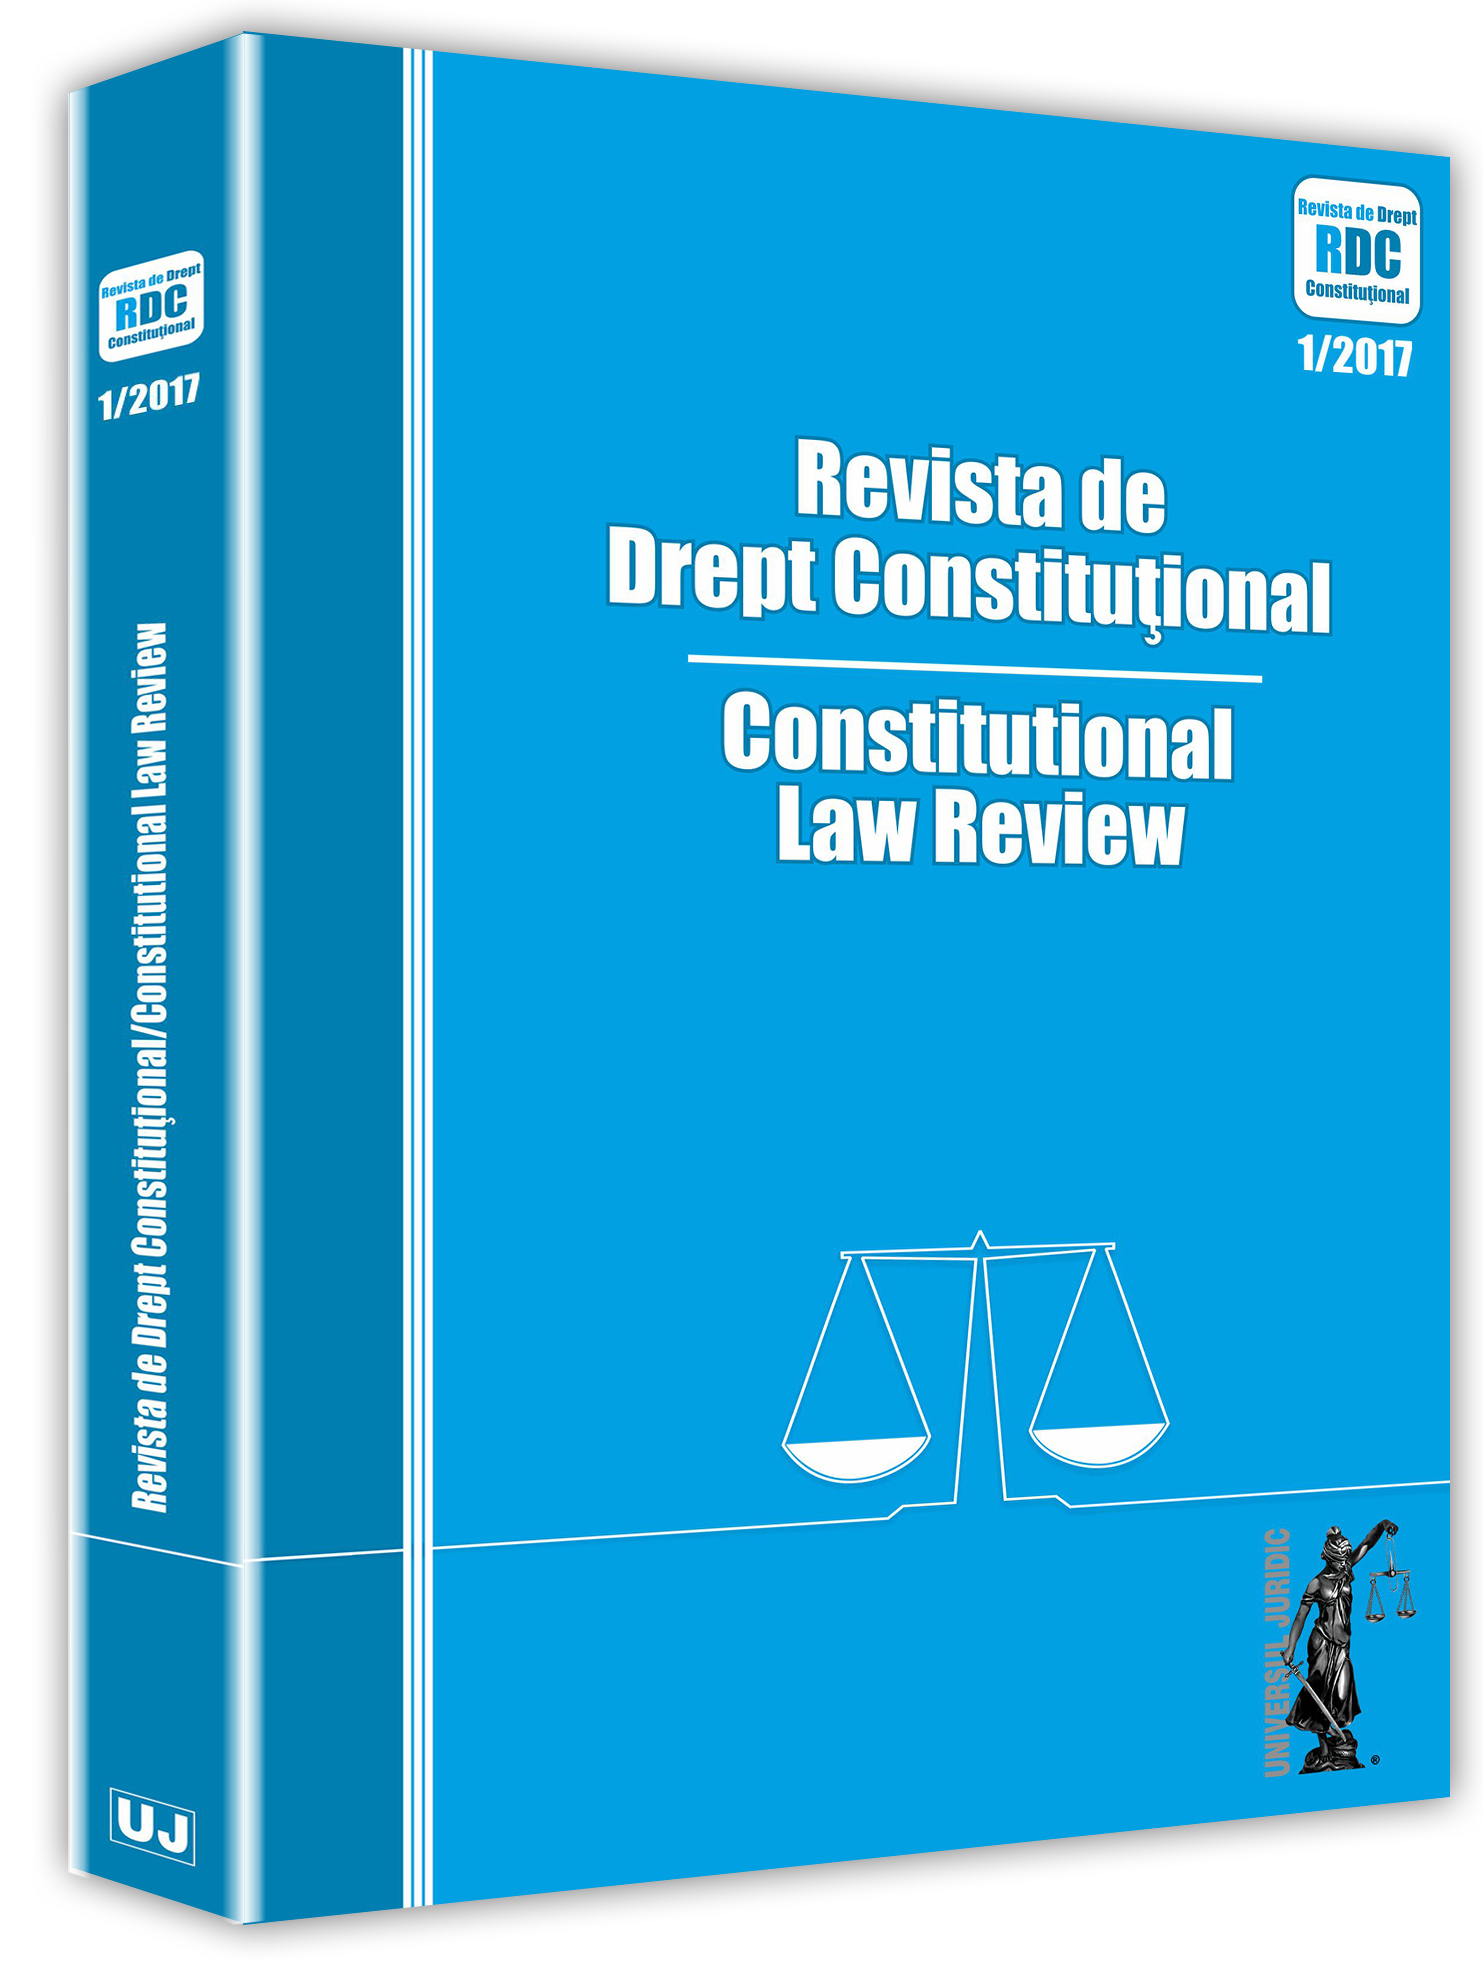 Introduction to the German constitution protection law
(Verfassungsschutzrecht)7 Cover Image